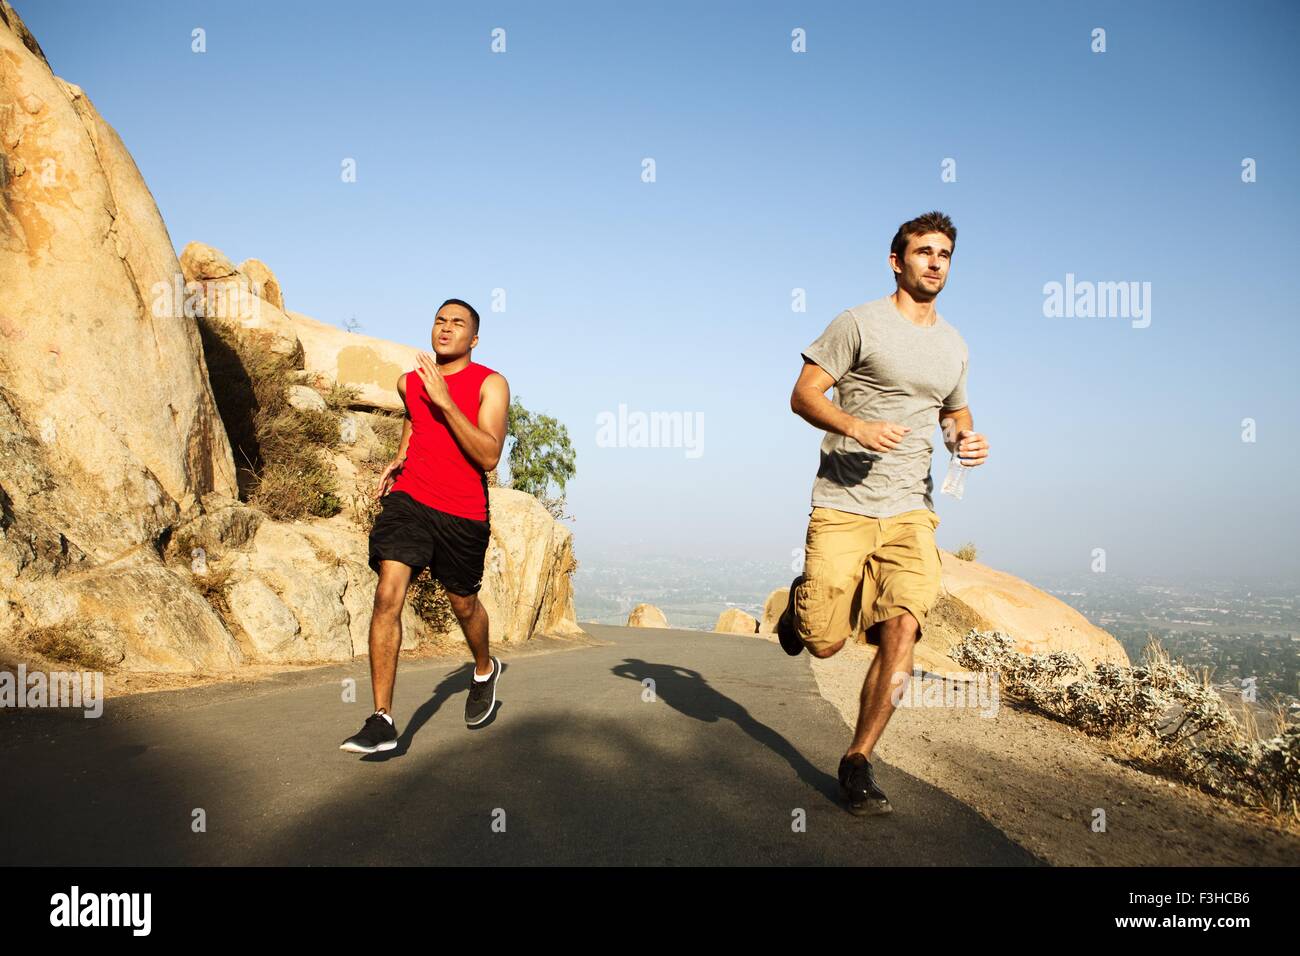 Two male friends running along mountain path Stock Photo